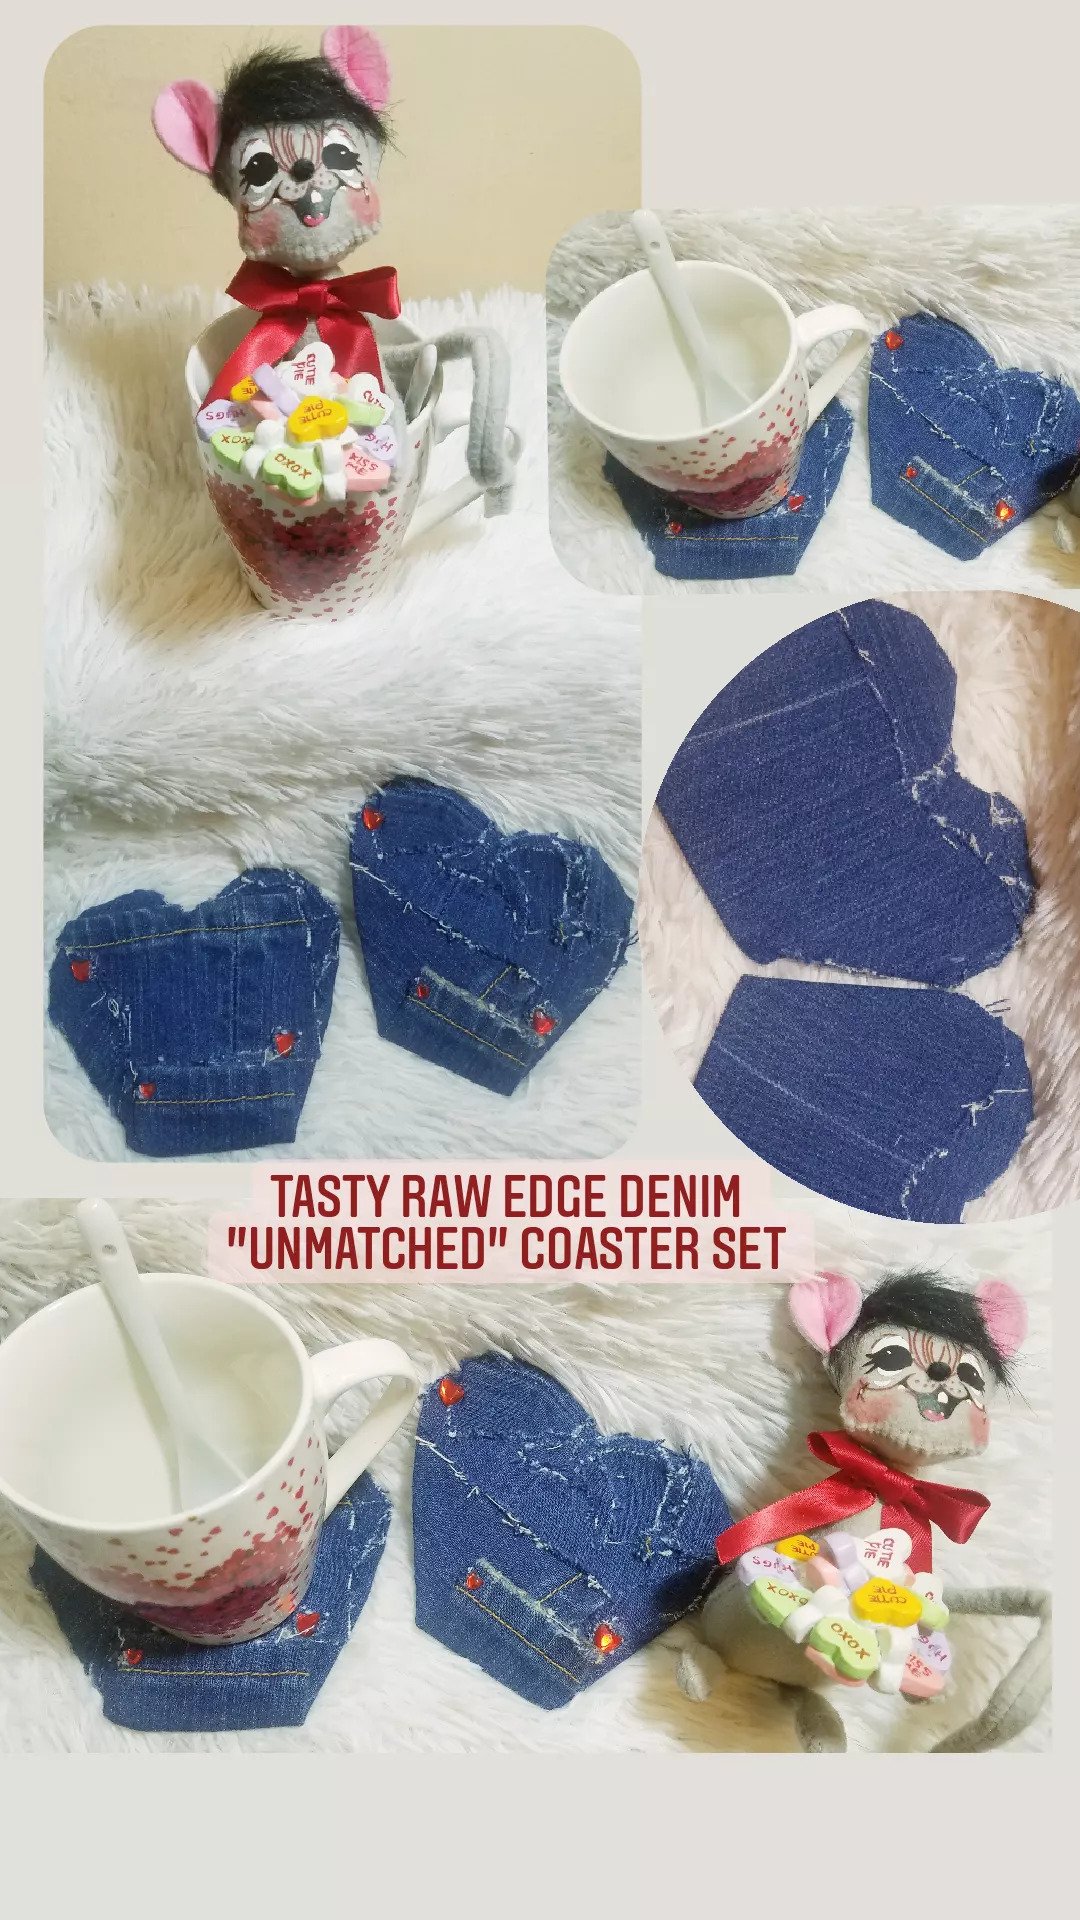 Image of Tasty Raw Edge Denim “Un-Matched” Coster Set